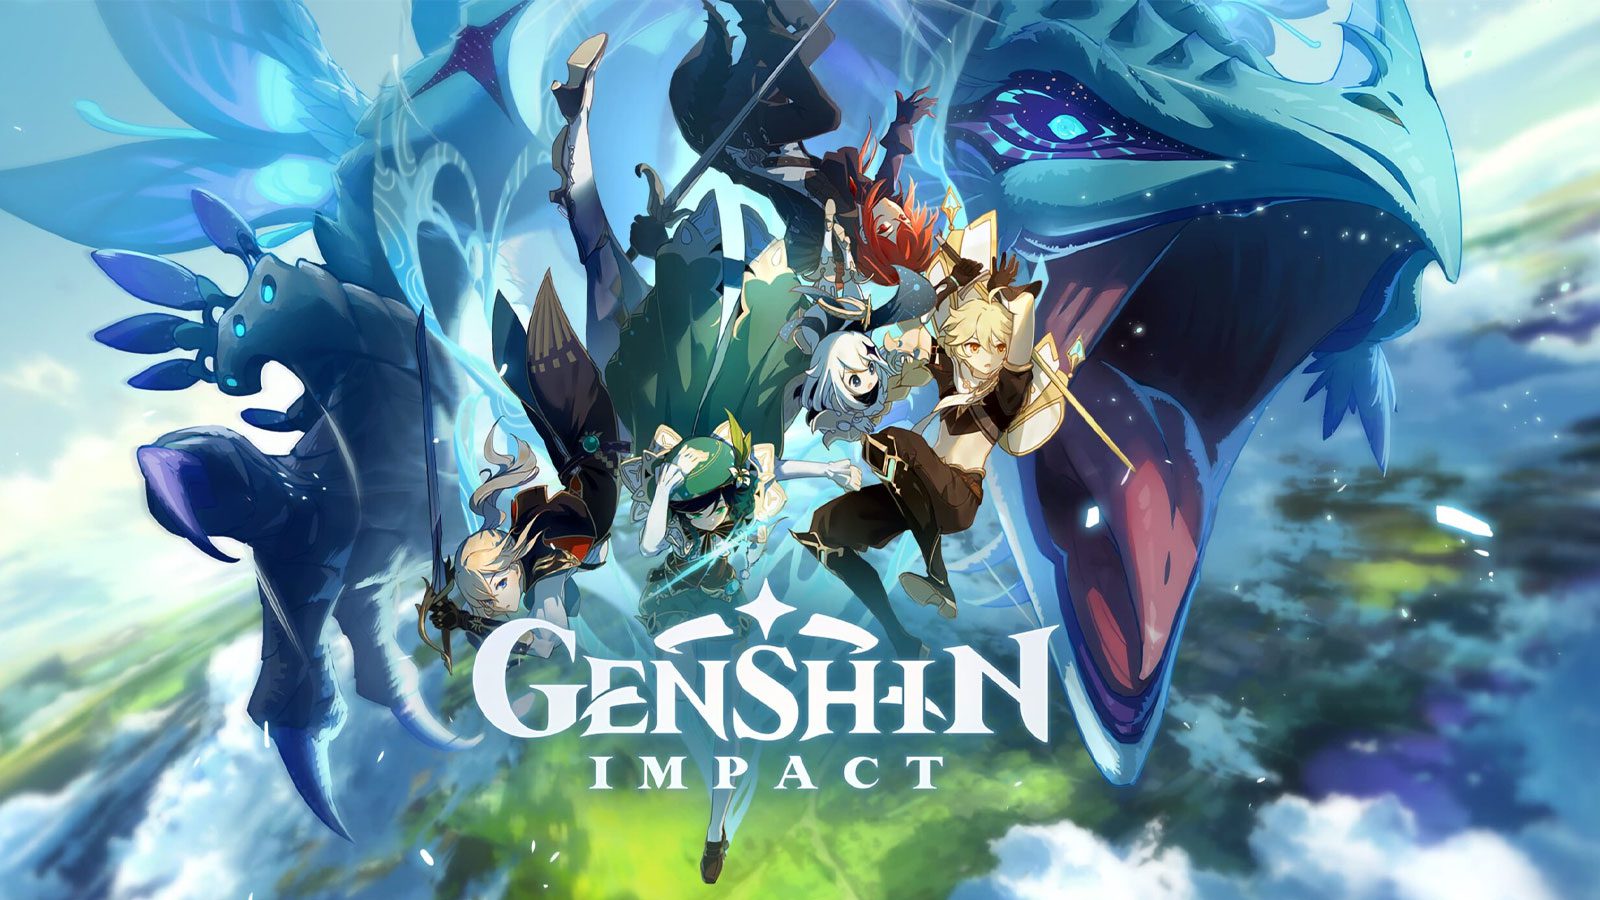 Genshin Impact on PC: Here’s how to download it for free